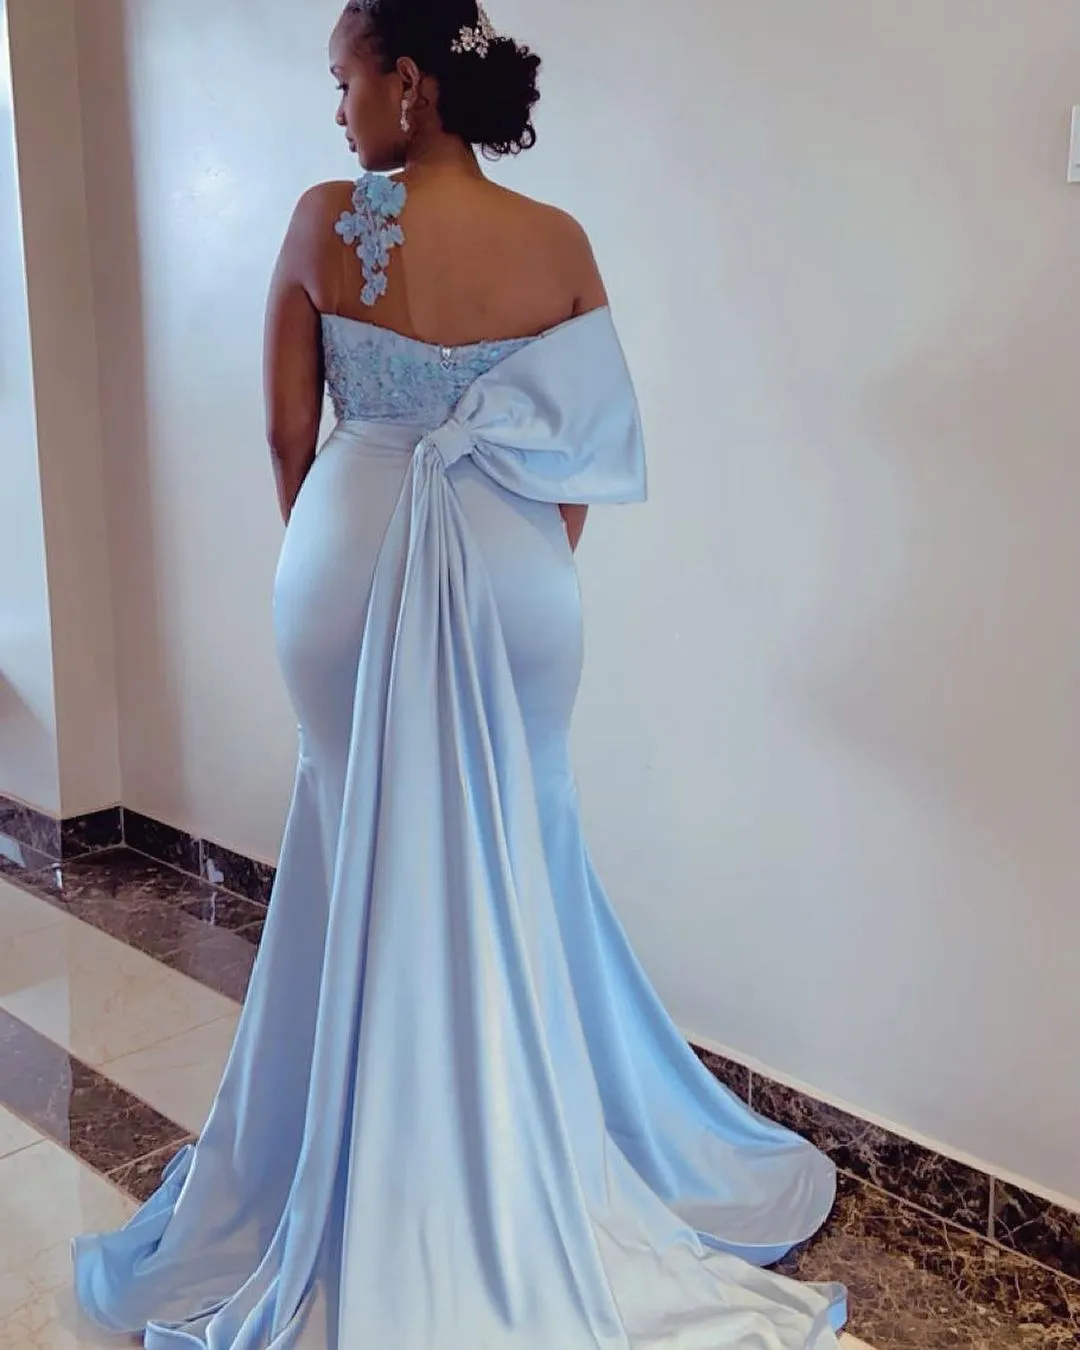 Light Blue Mermaid Bridesmaid Dresses Elegant One Shoulder Sleeveless 3D Flowers Appliques Plus Size Women Wedding Party Gowns With Bow Back Custom Made